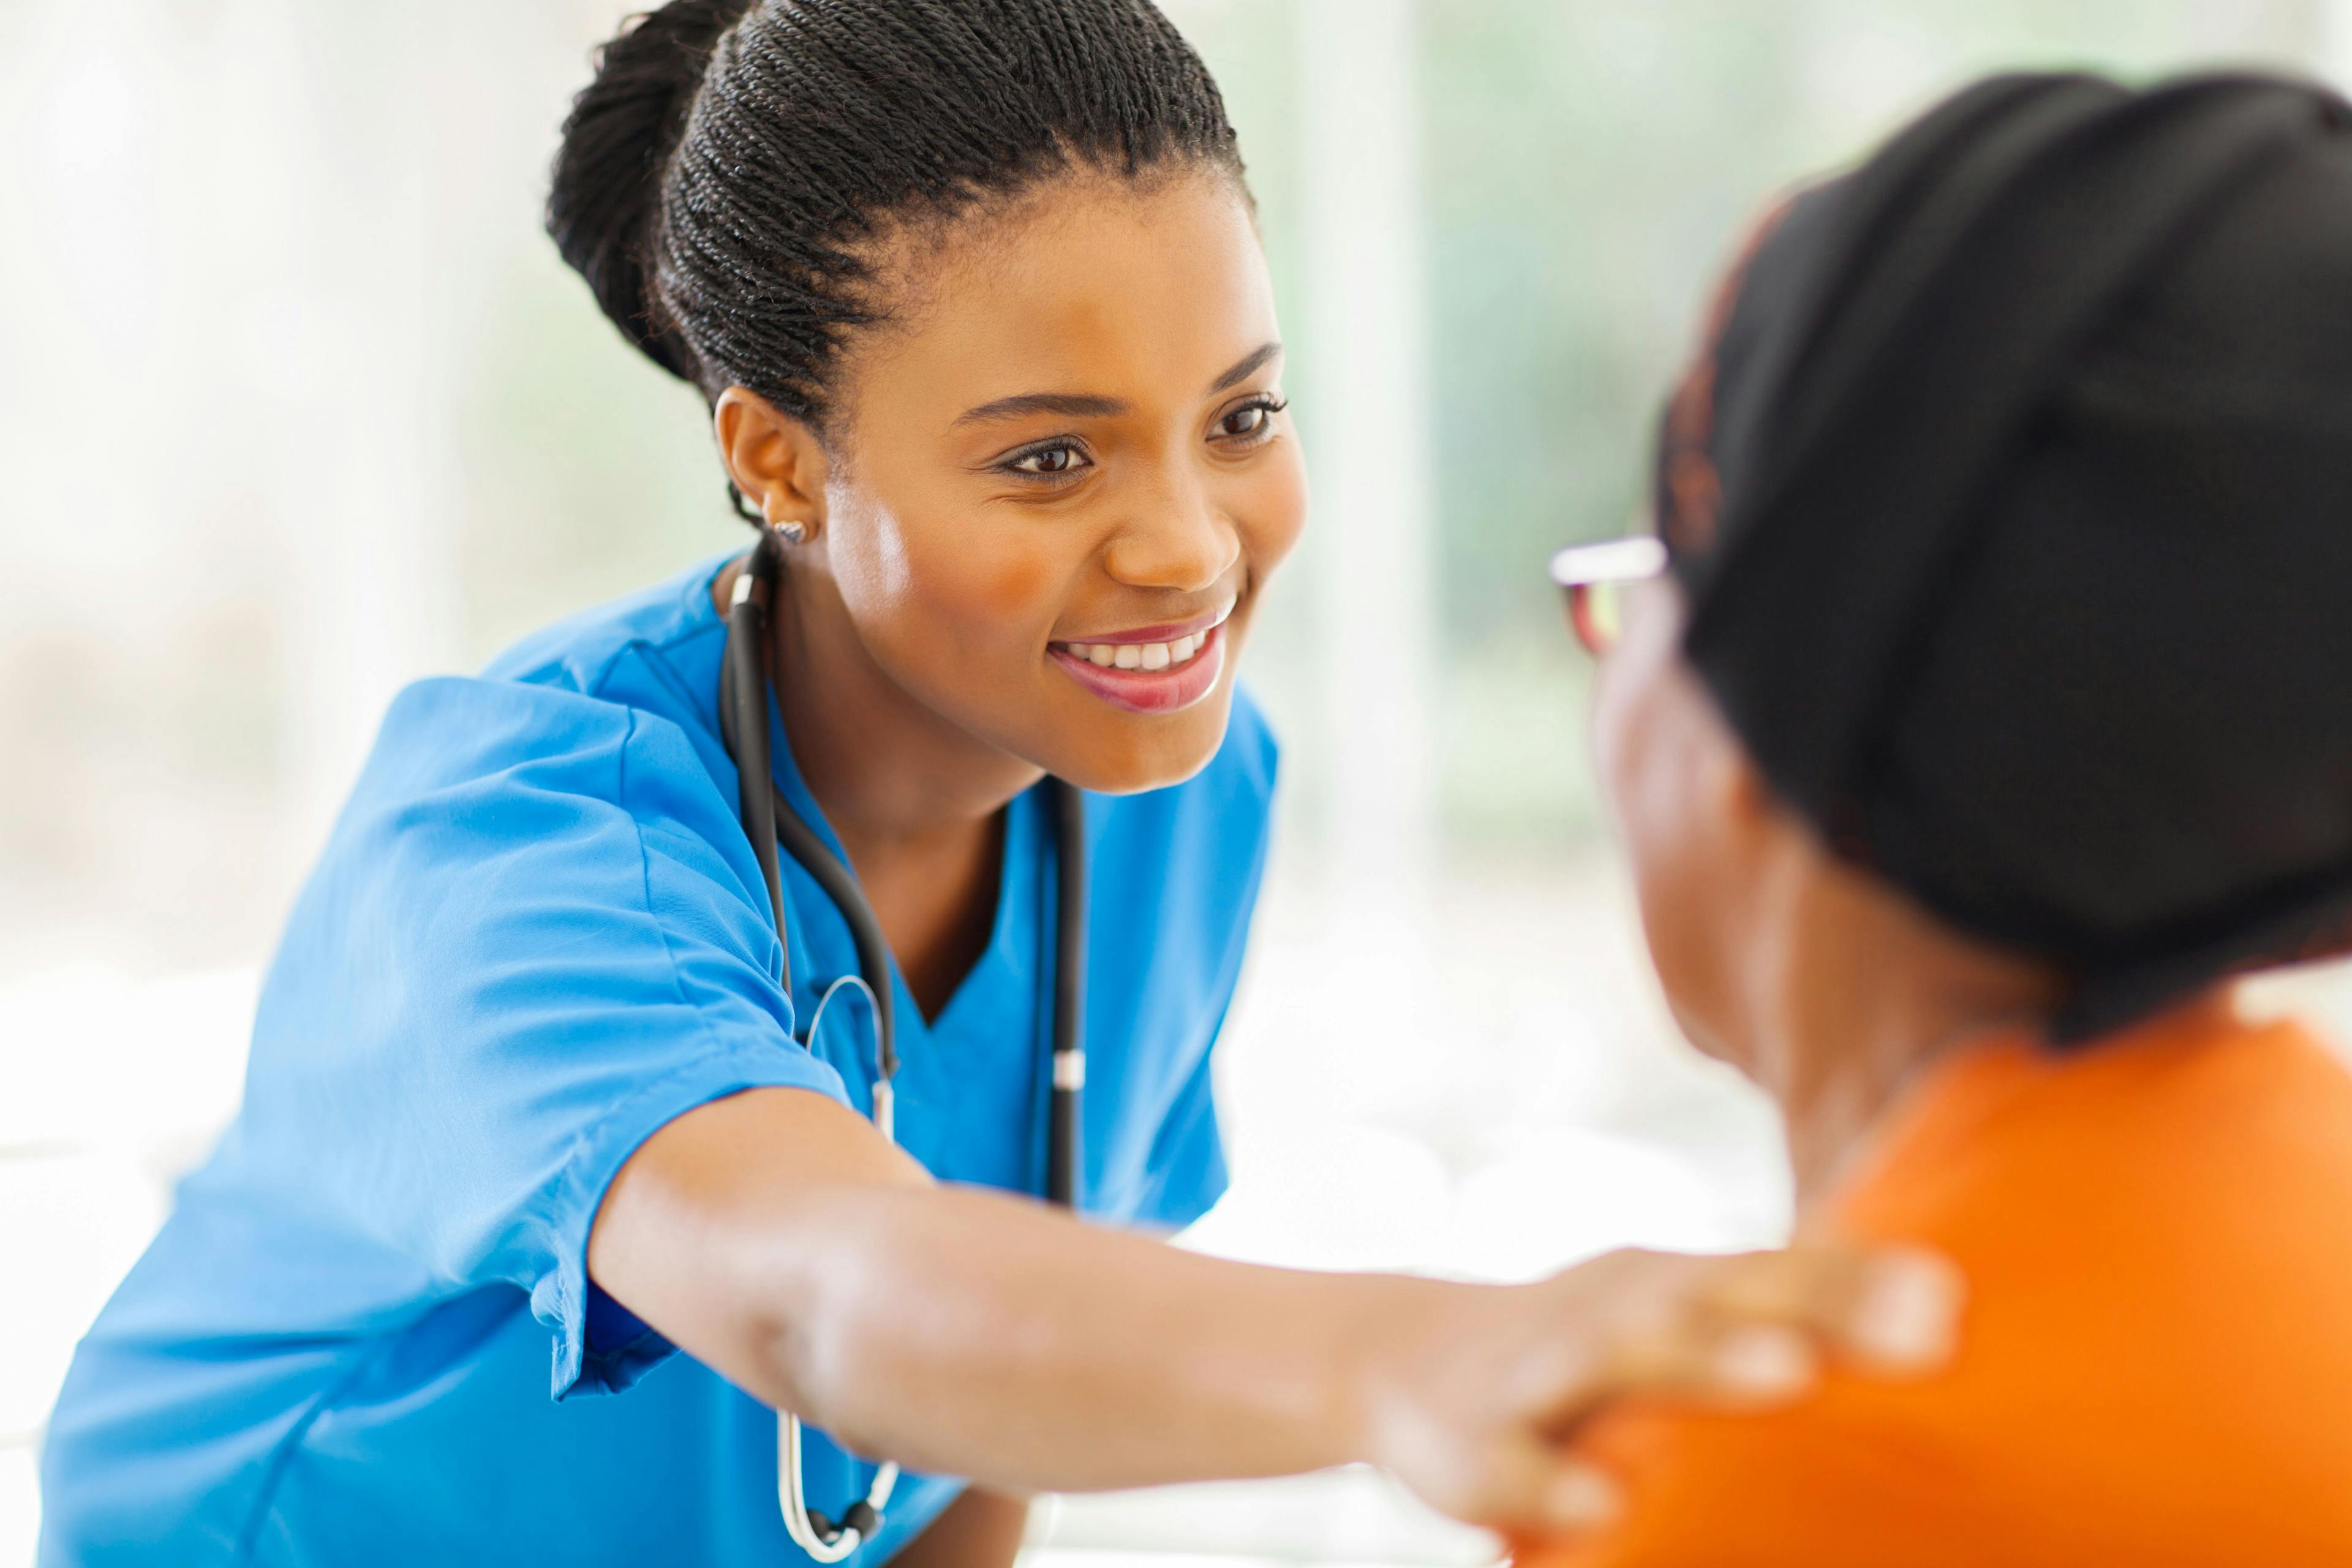 A Black health care provider touches the shoulder of a Black woman patient.